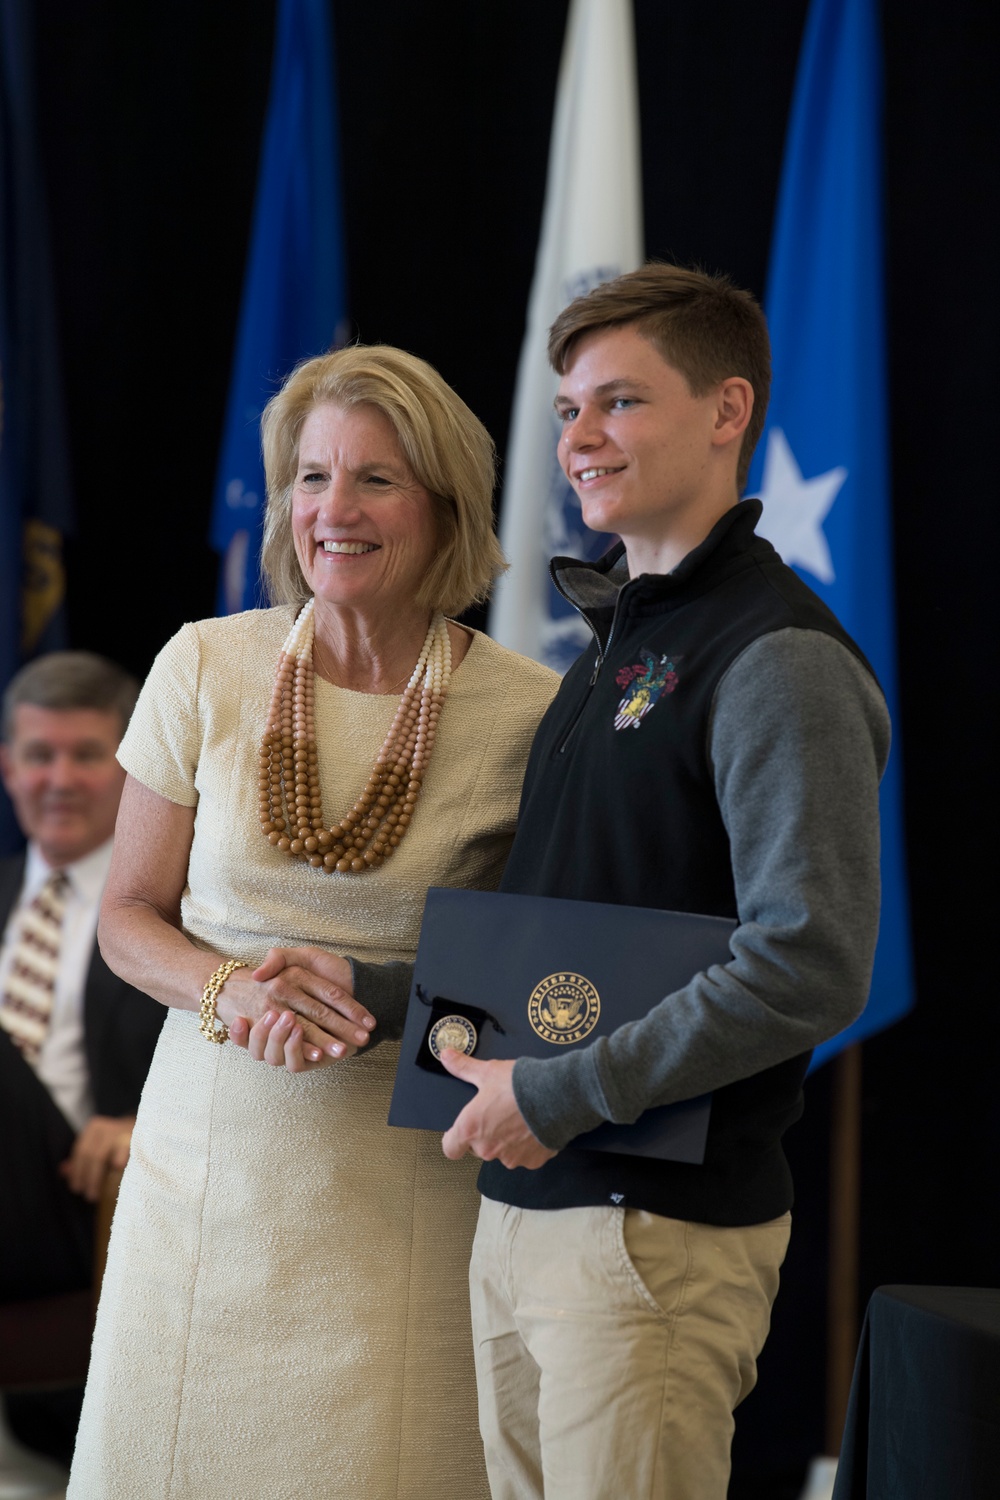 130th Hosts United States Service Academies Admittance Ceremony